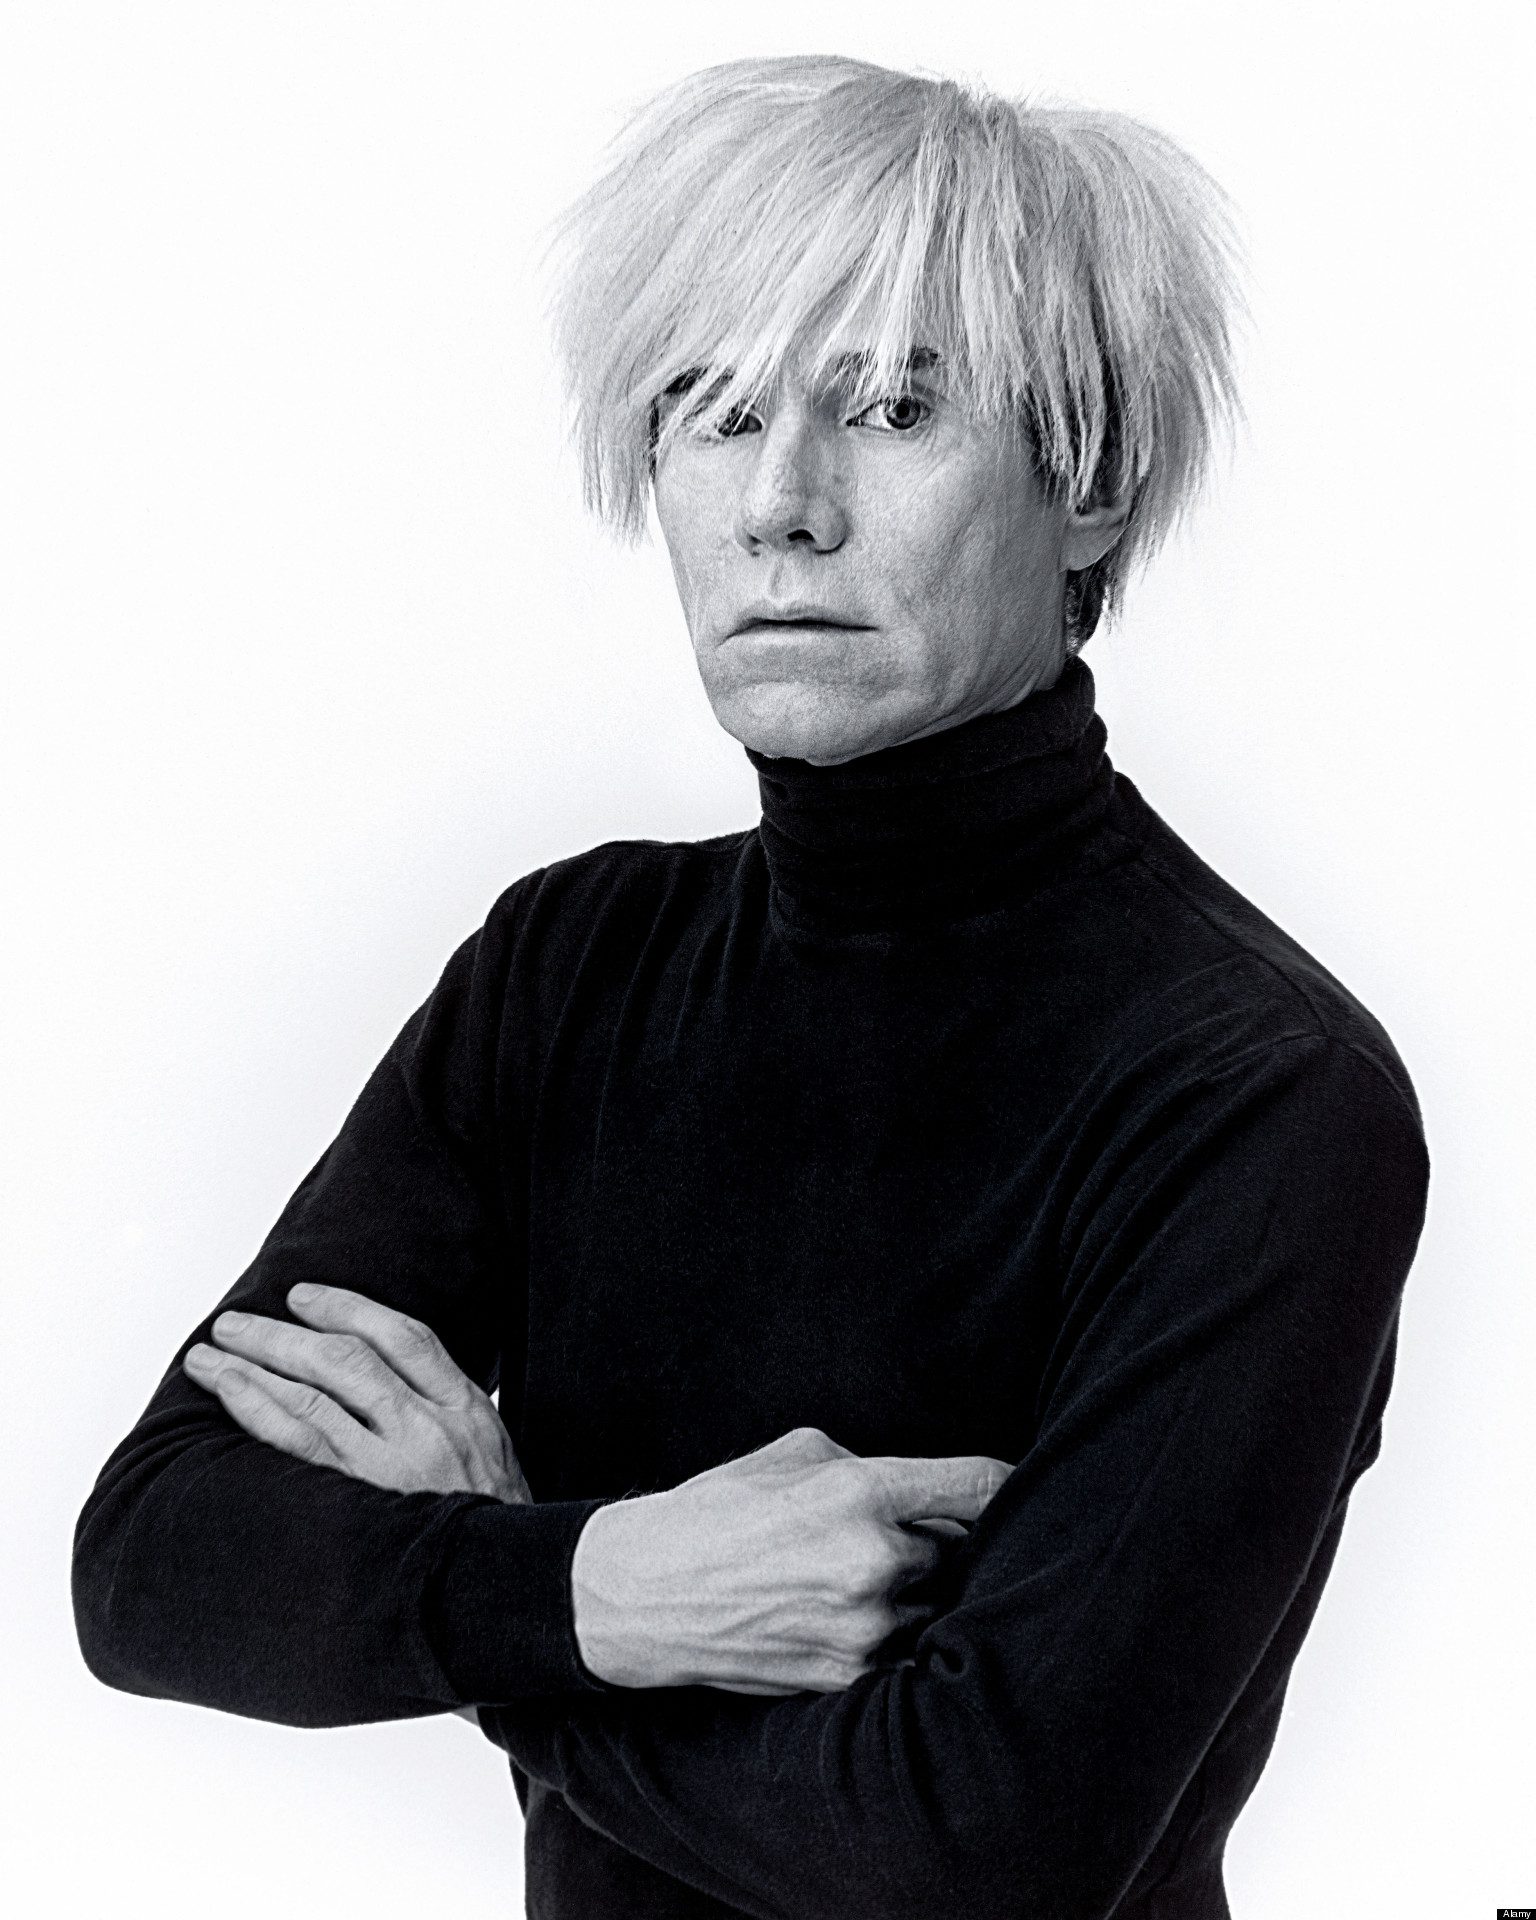 Andy Warhol portrait in black and white